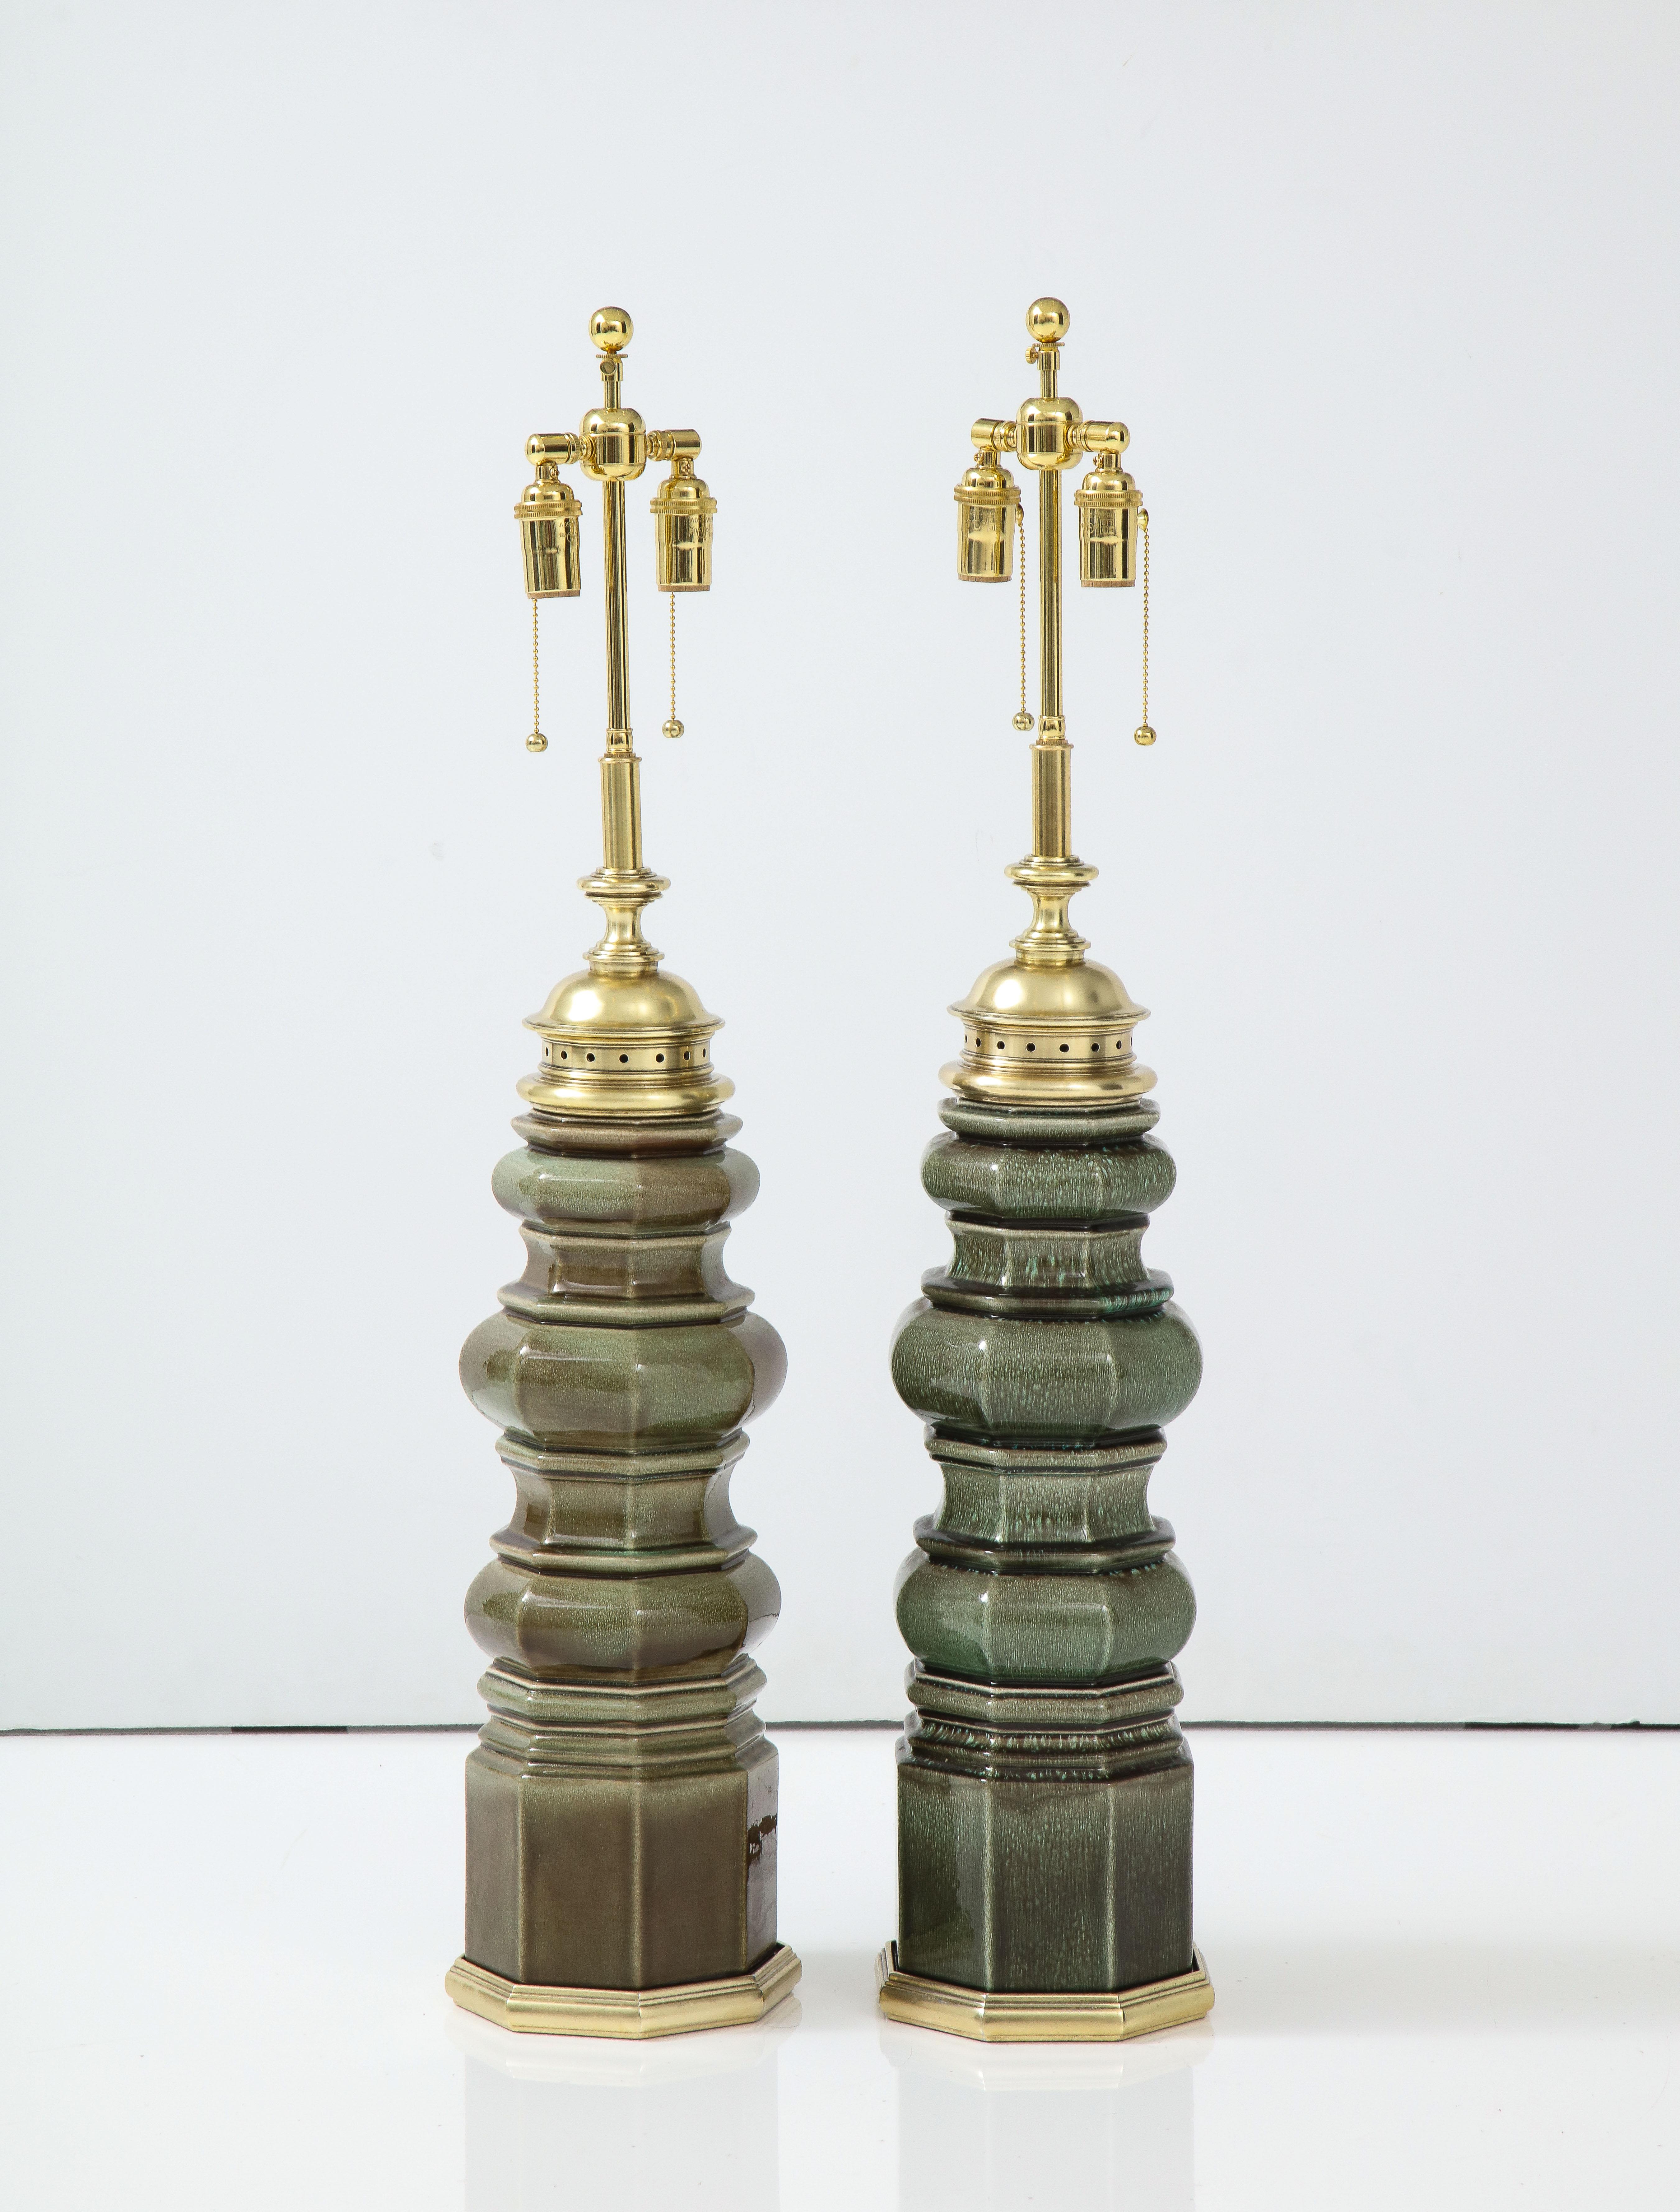 Wonderful pair of Large Pagoda lamps by Stiffel lamp company.
The Pagoda shaped ceramic lamps have a lovely Moss Green glazed finish and they have been Newly rewired with adjustable polished brass double clusters and silk rayon cords.
They are